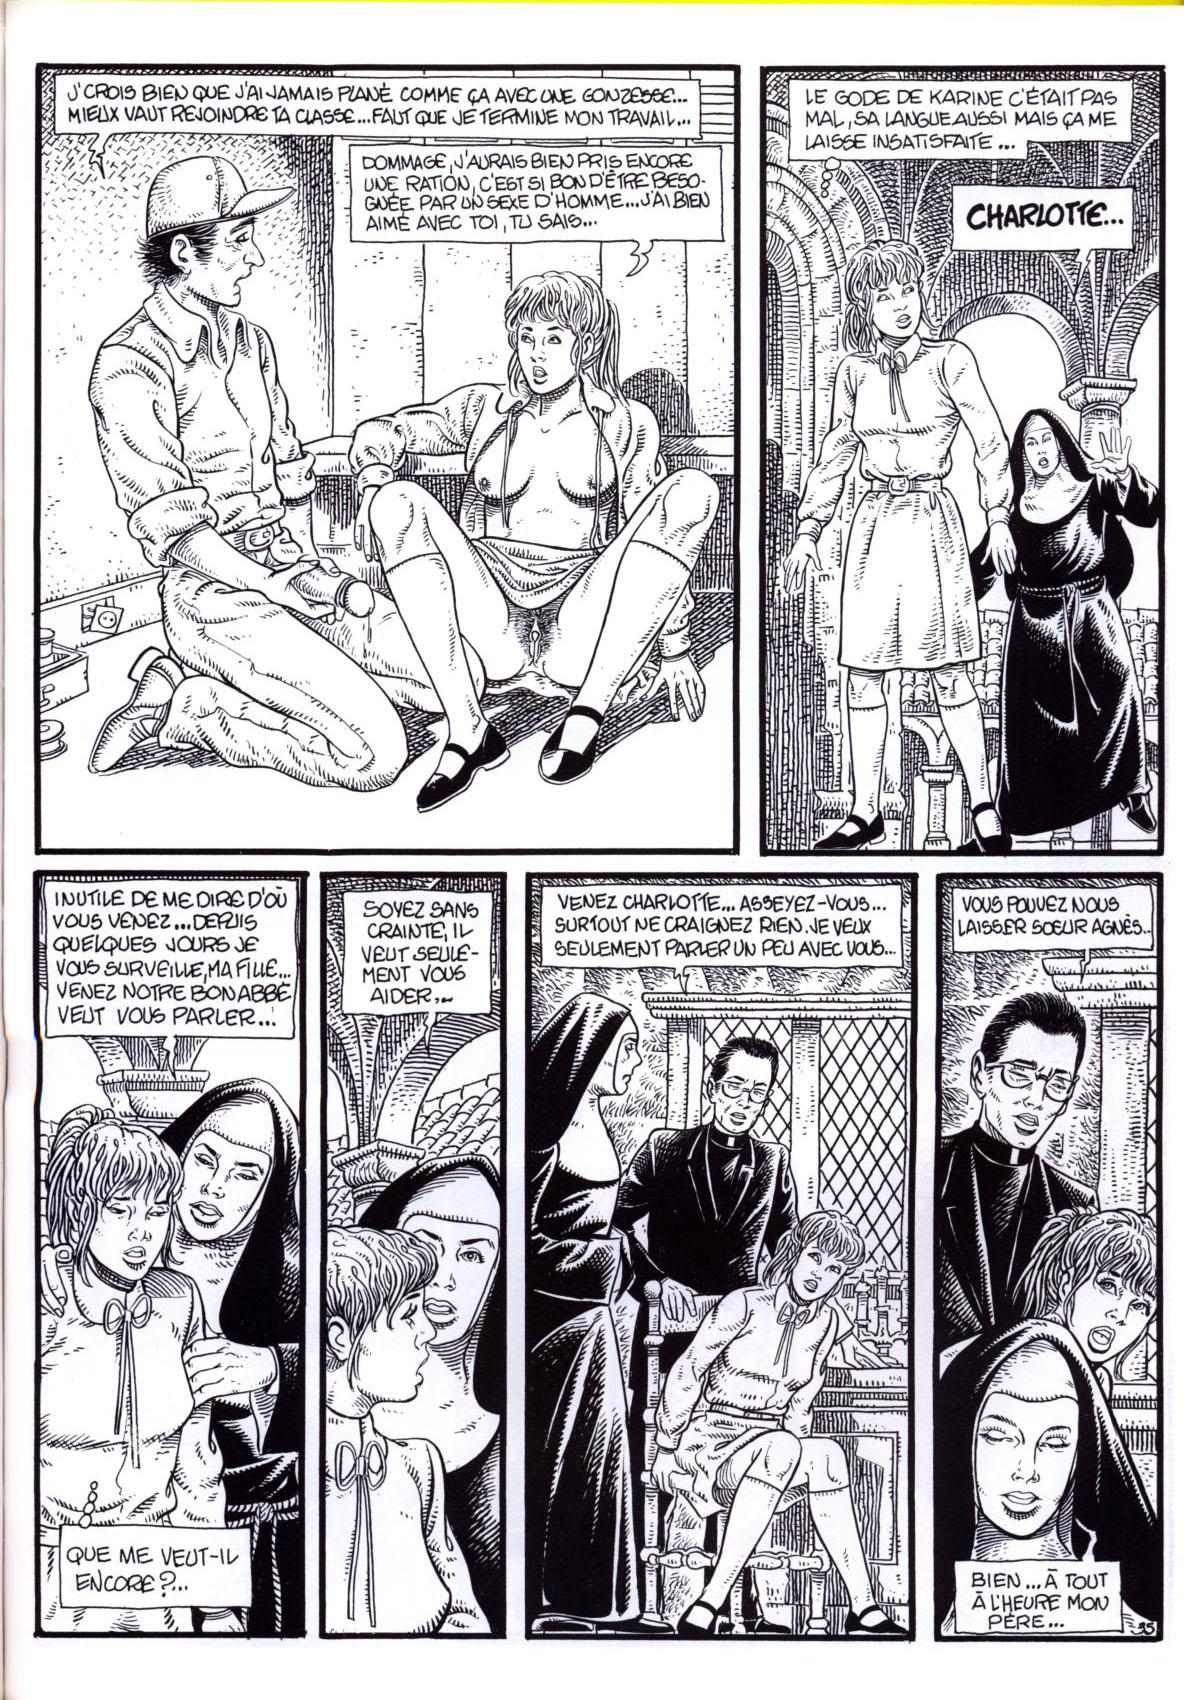 The Mary Magdalene Boarding School - Volume 3 numero d'image 37